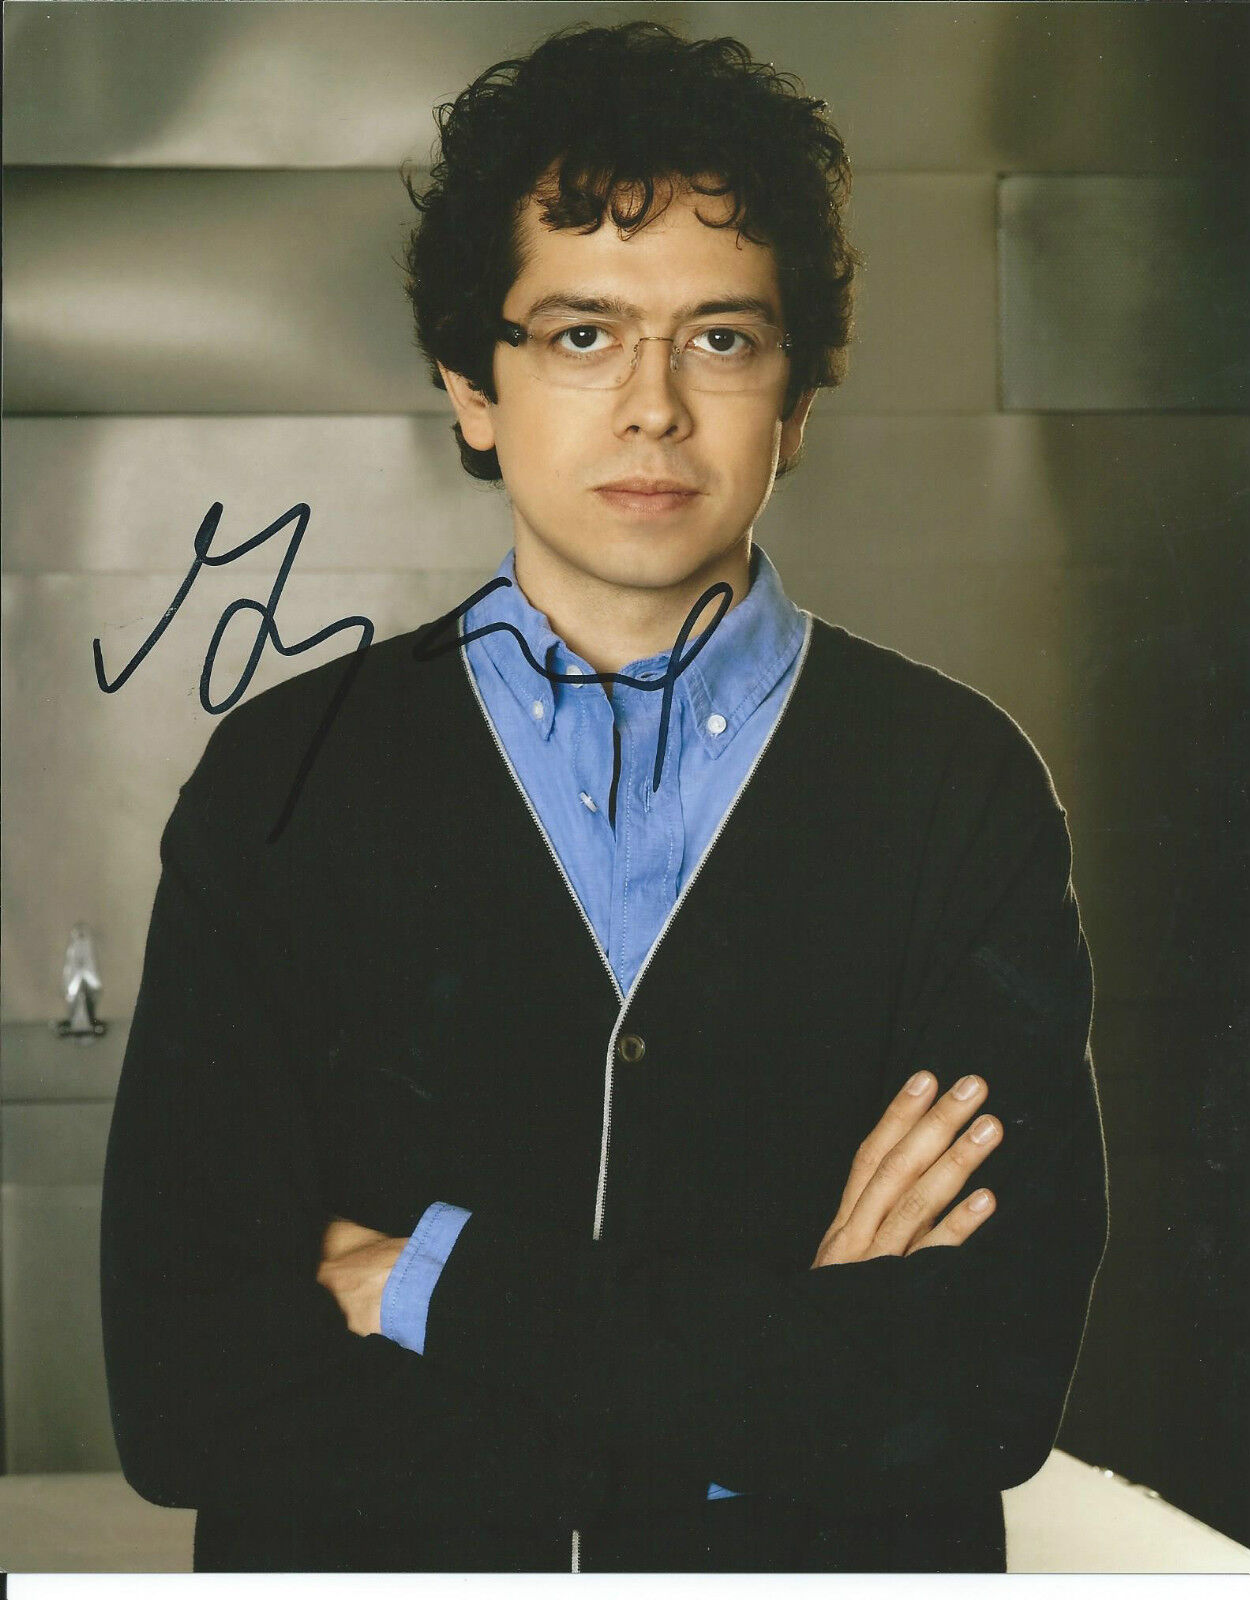 **GFA Super Troopers Movie *GEOFFREY AREND* Signed 8x10 Photo Poster painting MH5 COA**